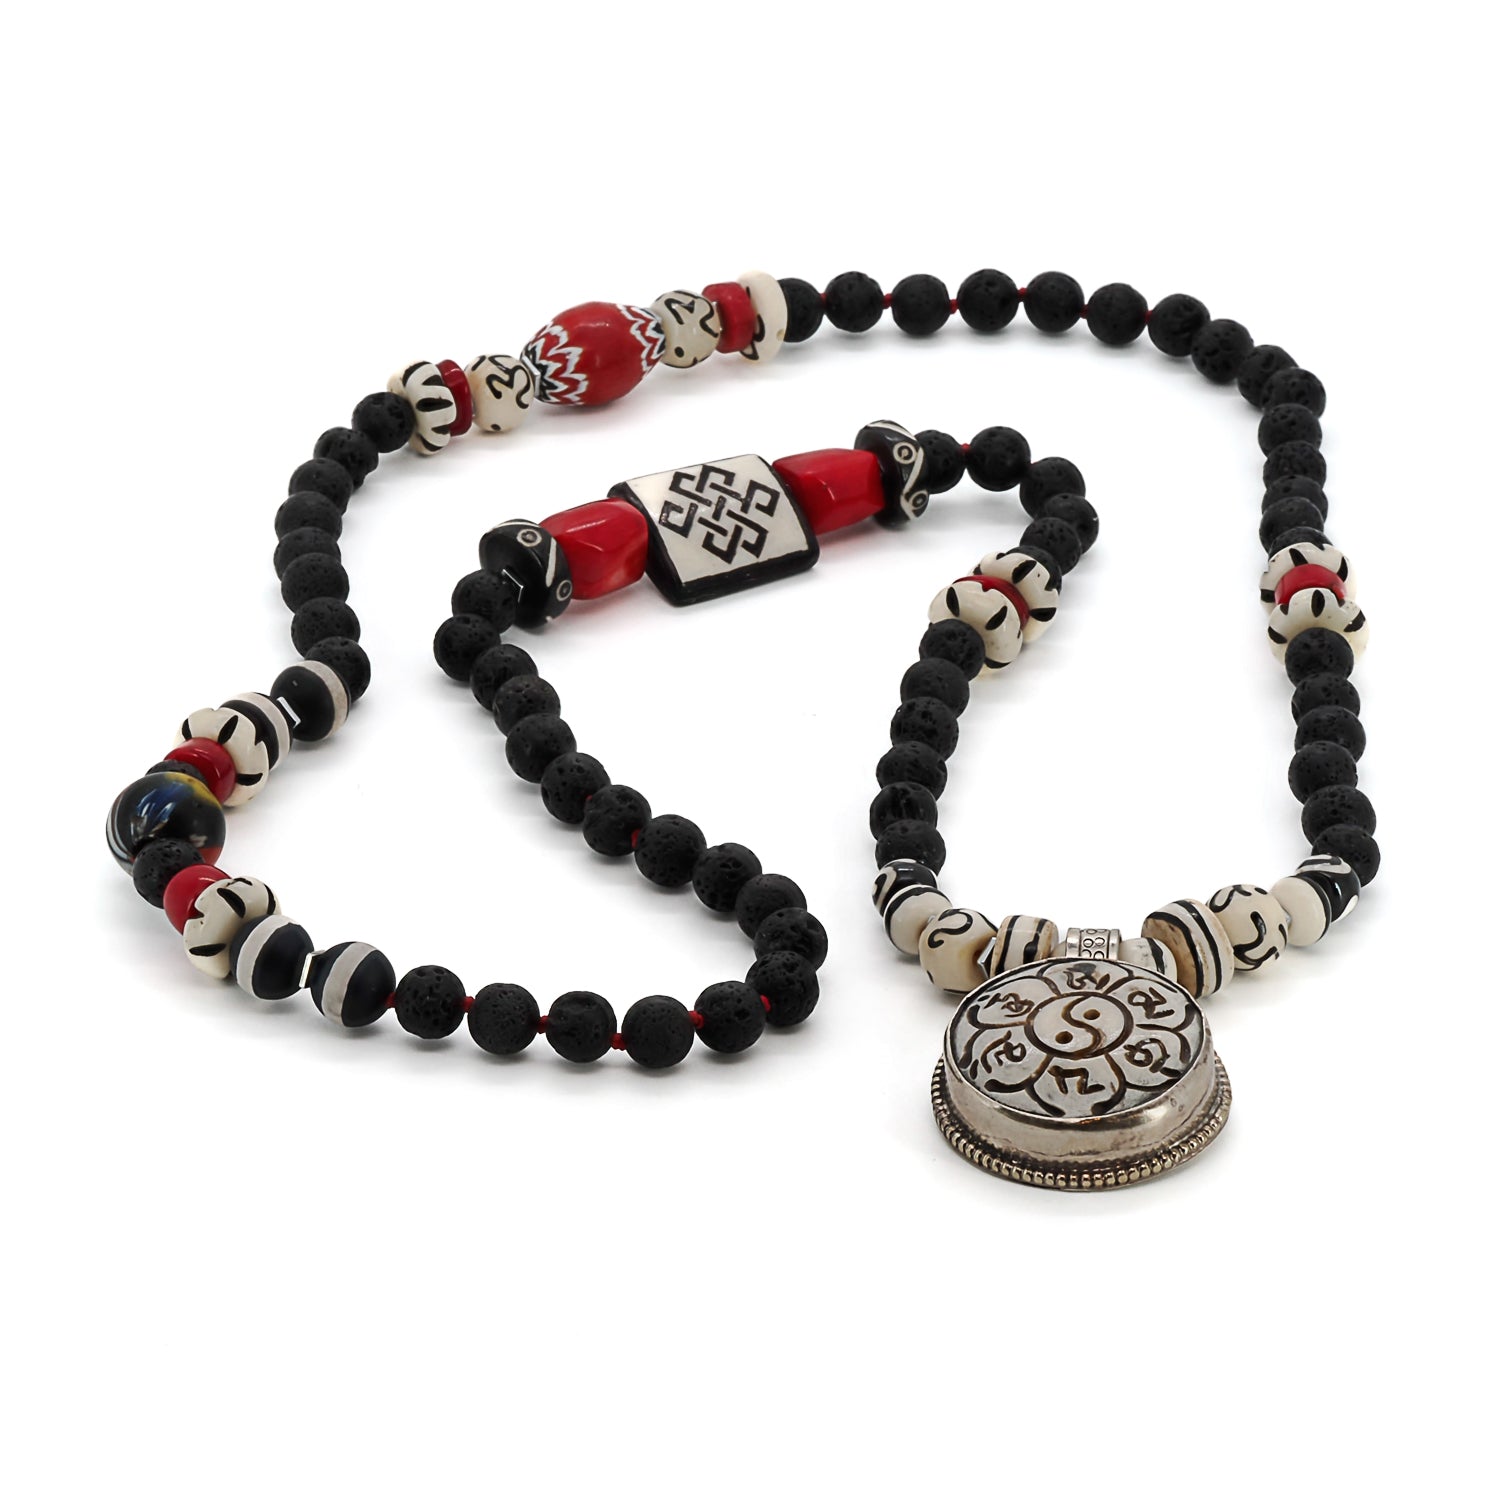 Handcrafted necklace showcasing the beauty of the Yin Yang symbol, representing balance and harmony in life.